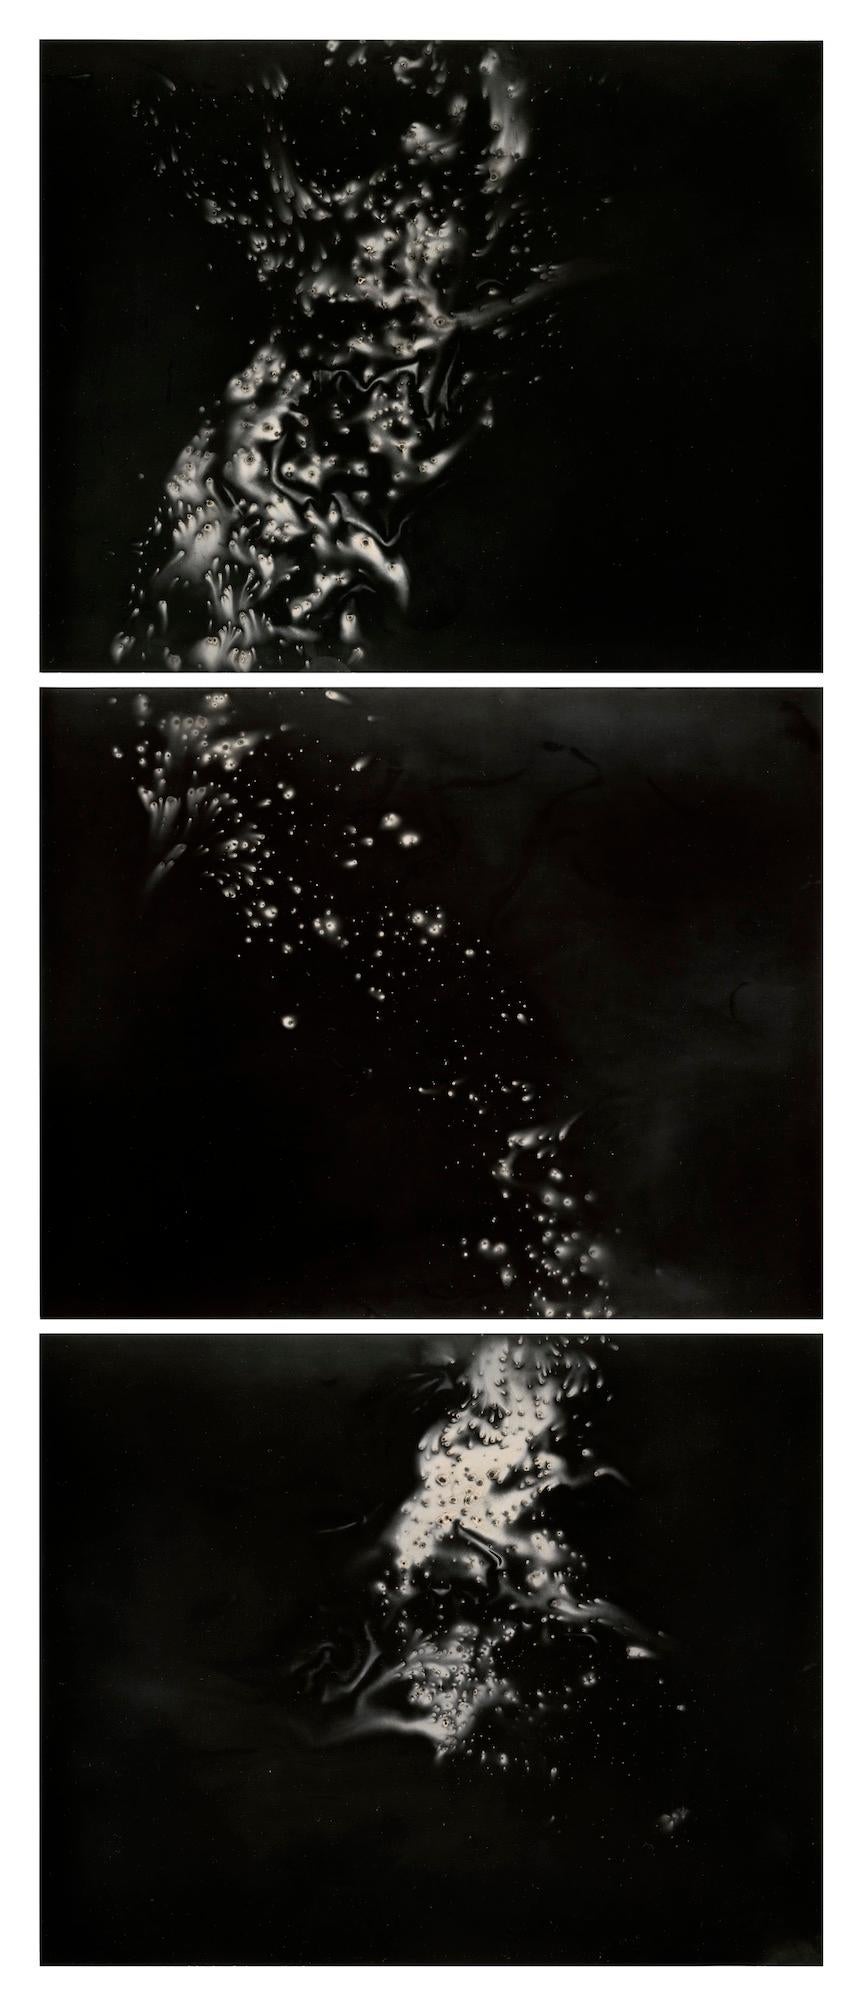 Christopher Colville Abstract Photograph - Untitled Work of Fire (Hydra Triptych)